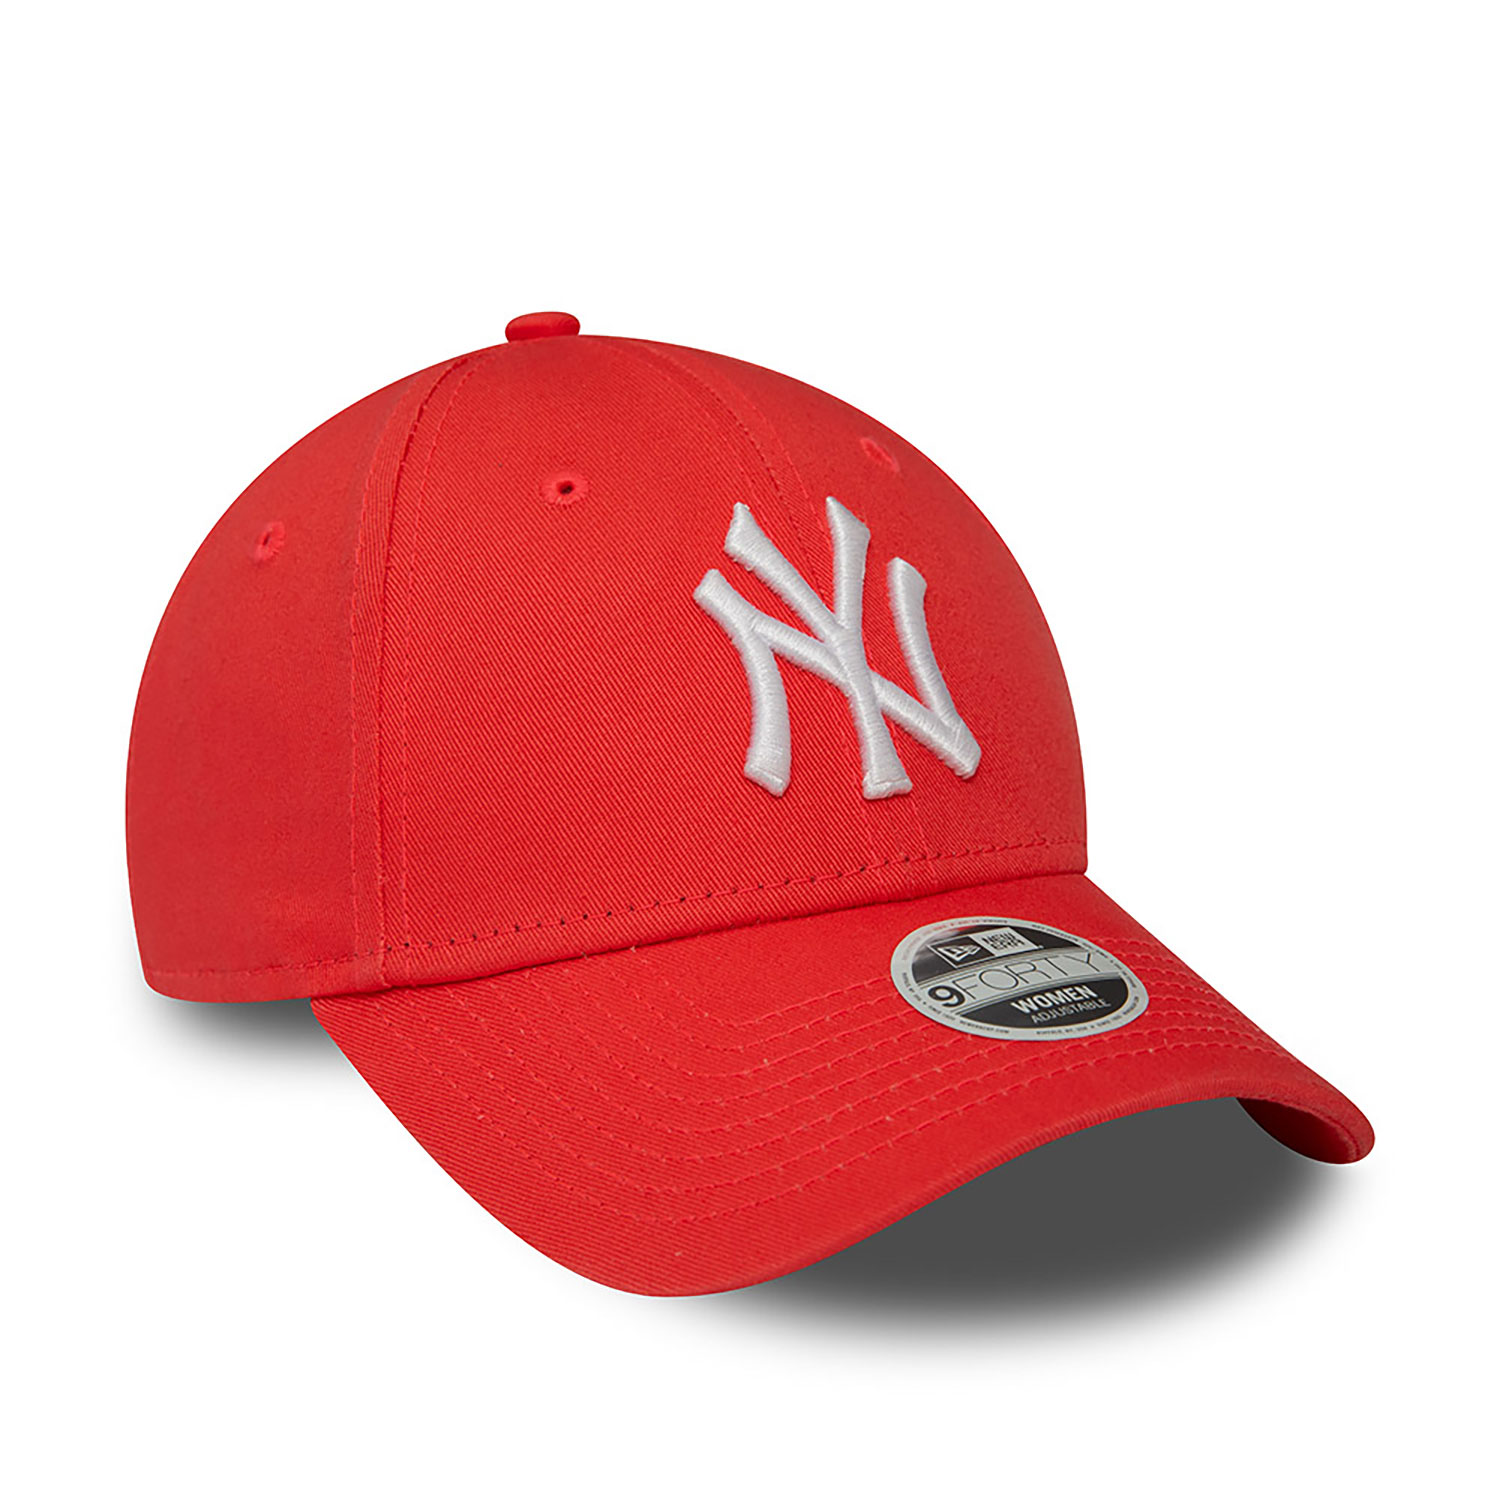 New York Yankees Womens League Essential Red 9FORTY Adjustable Cap